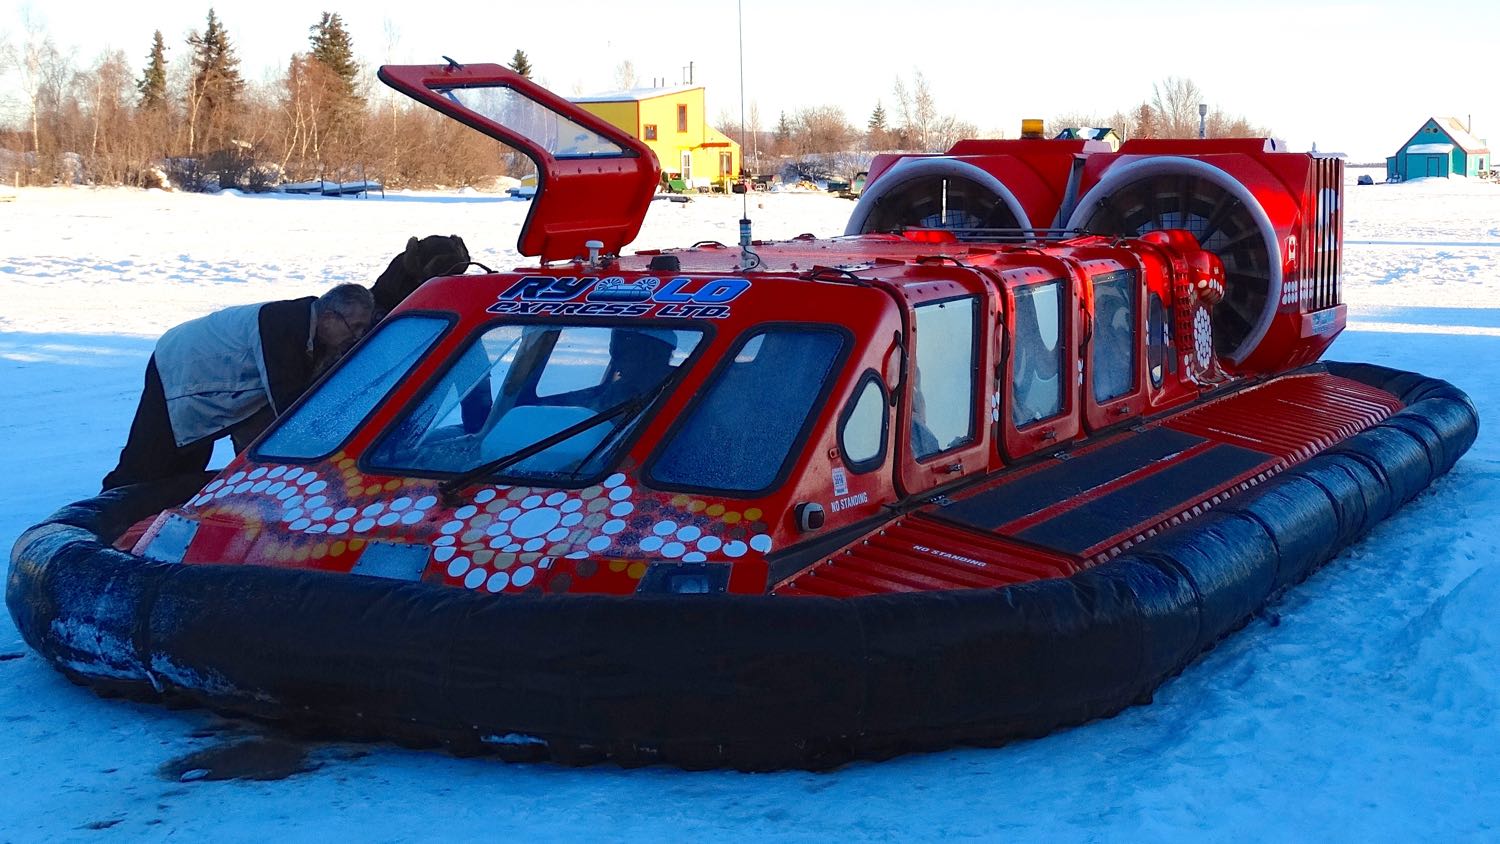 Peter Basko's hovercraft in March 2015